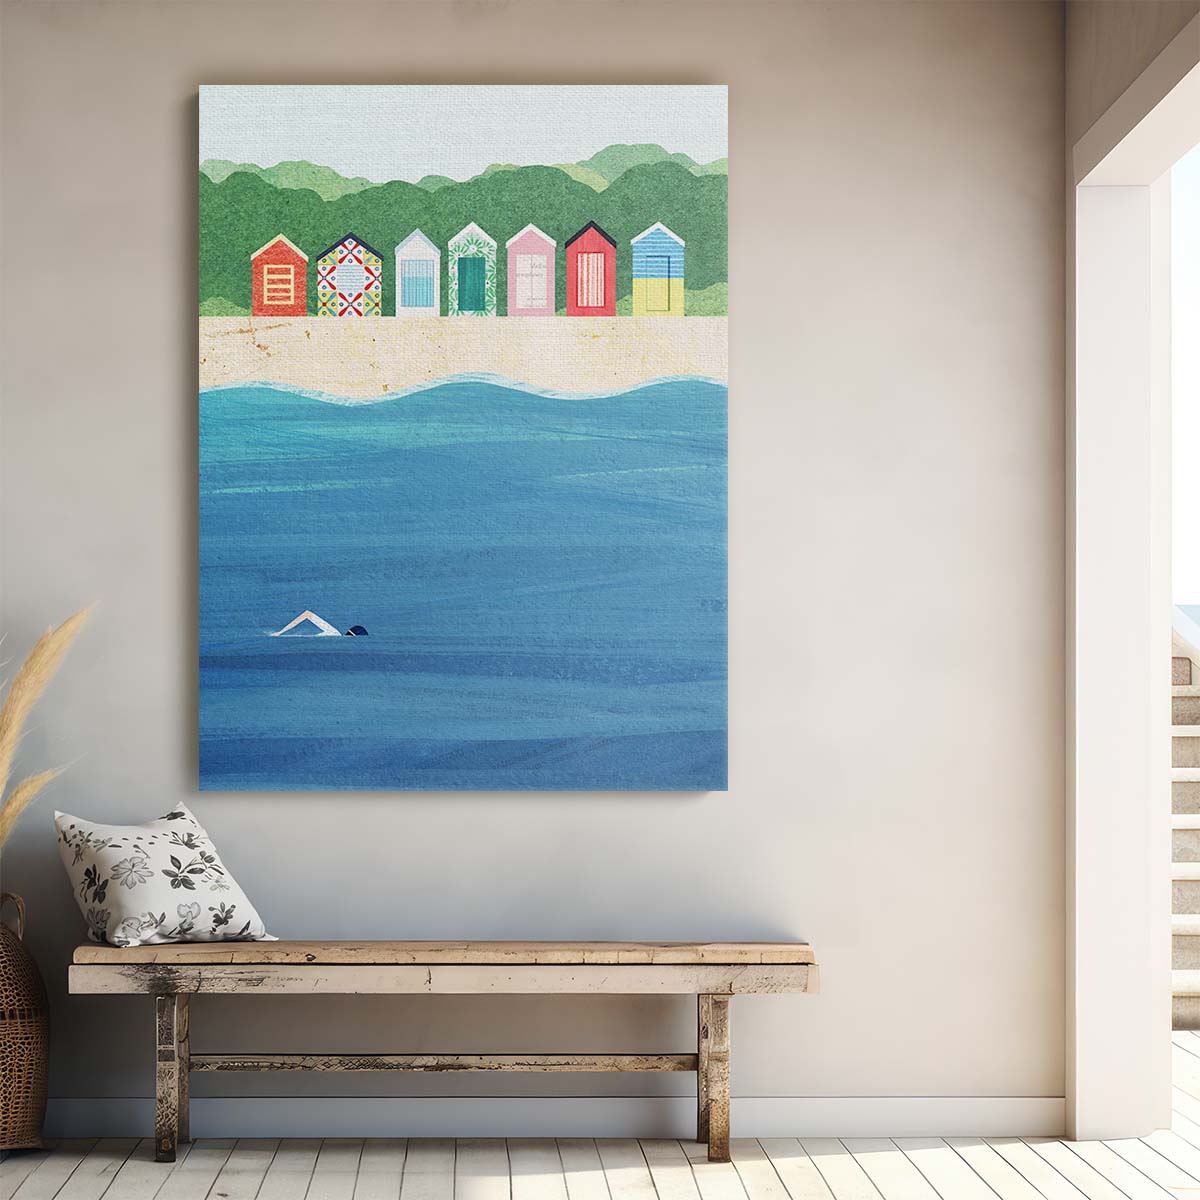 Colorful Brighton Beach Huts Illustration Art, Melbourne Australia by Luxuriance Designs, made in USA